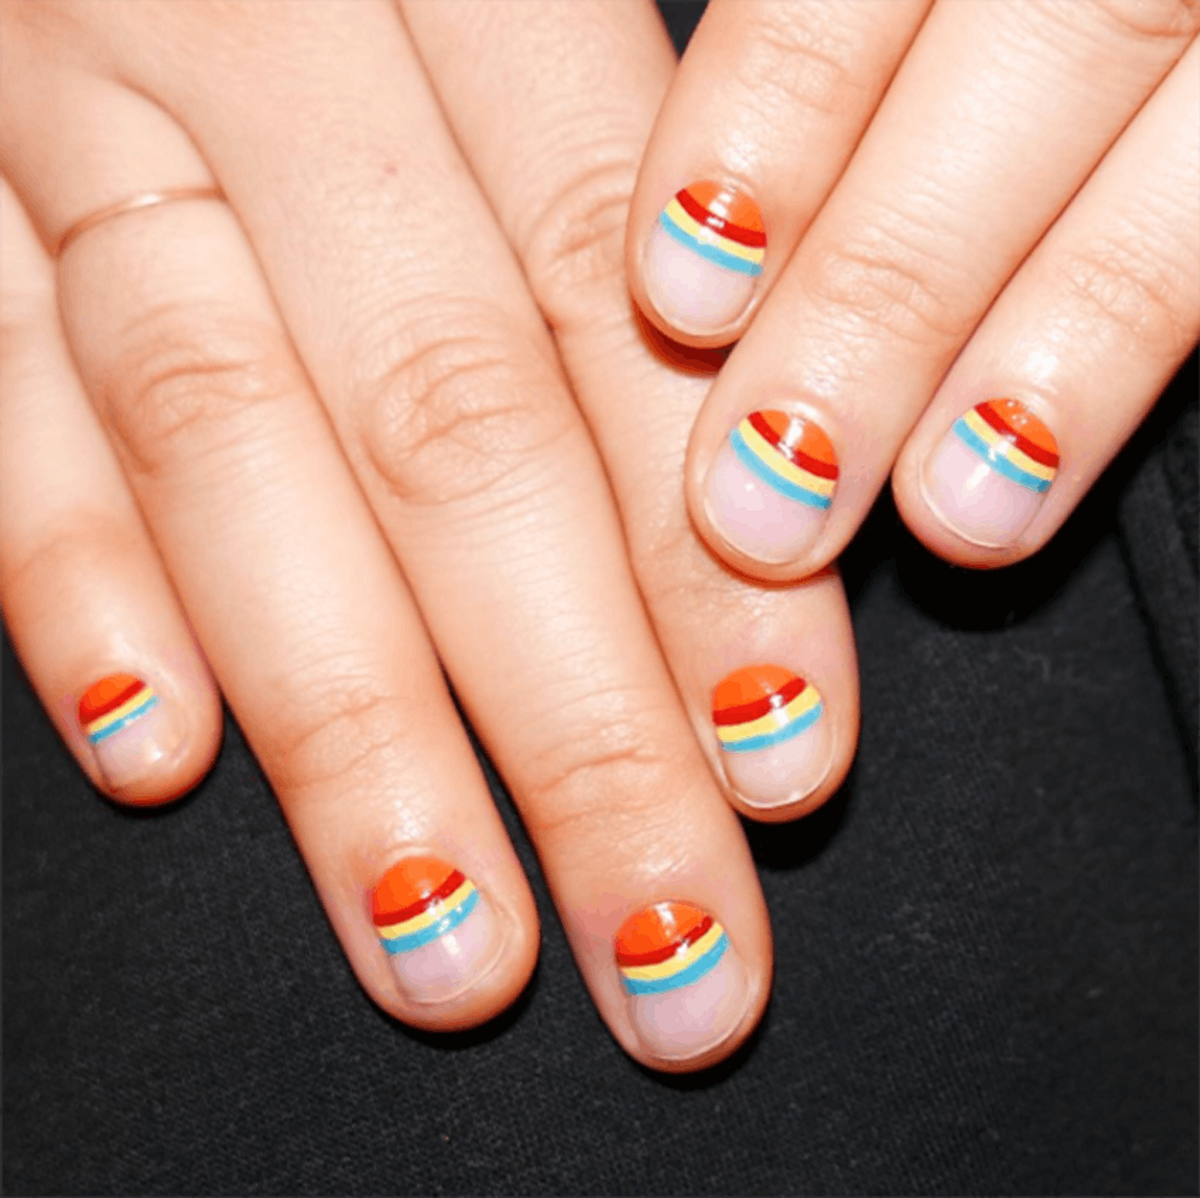 These Negative Space Manis Are Too Stylish to Pass Up